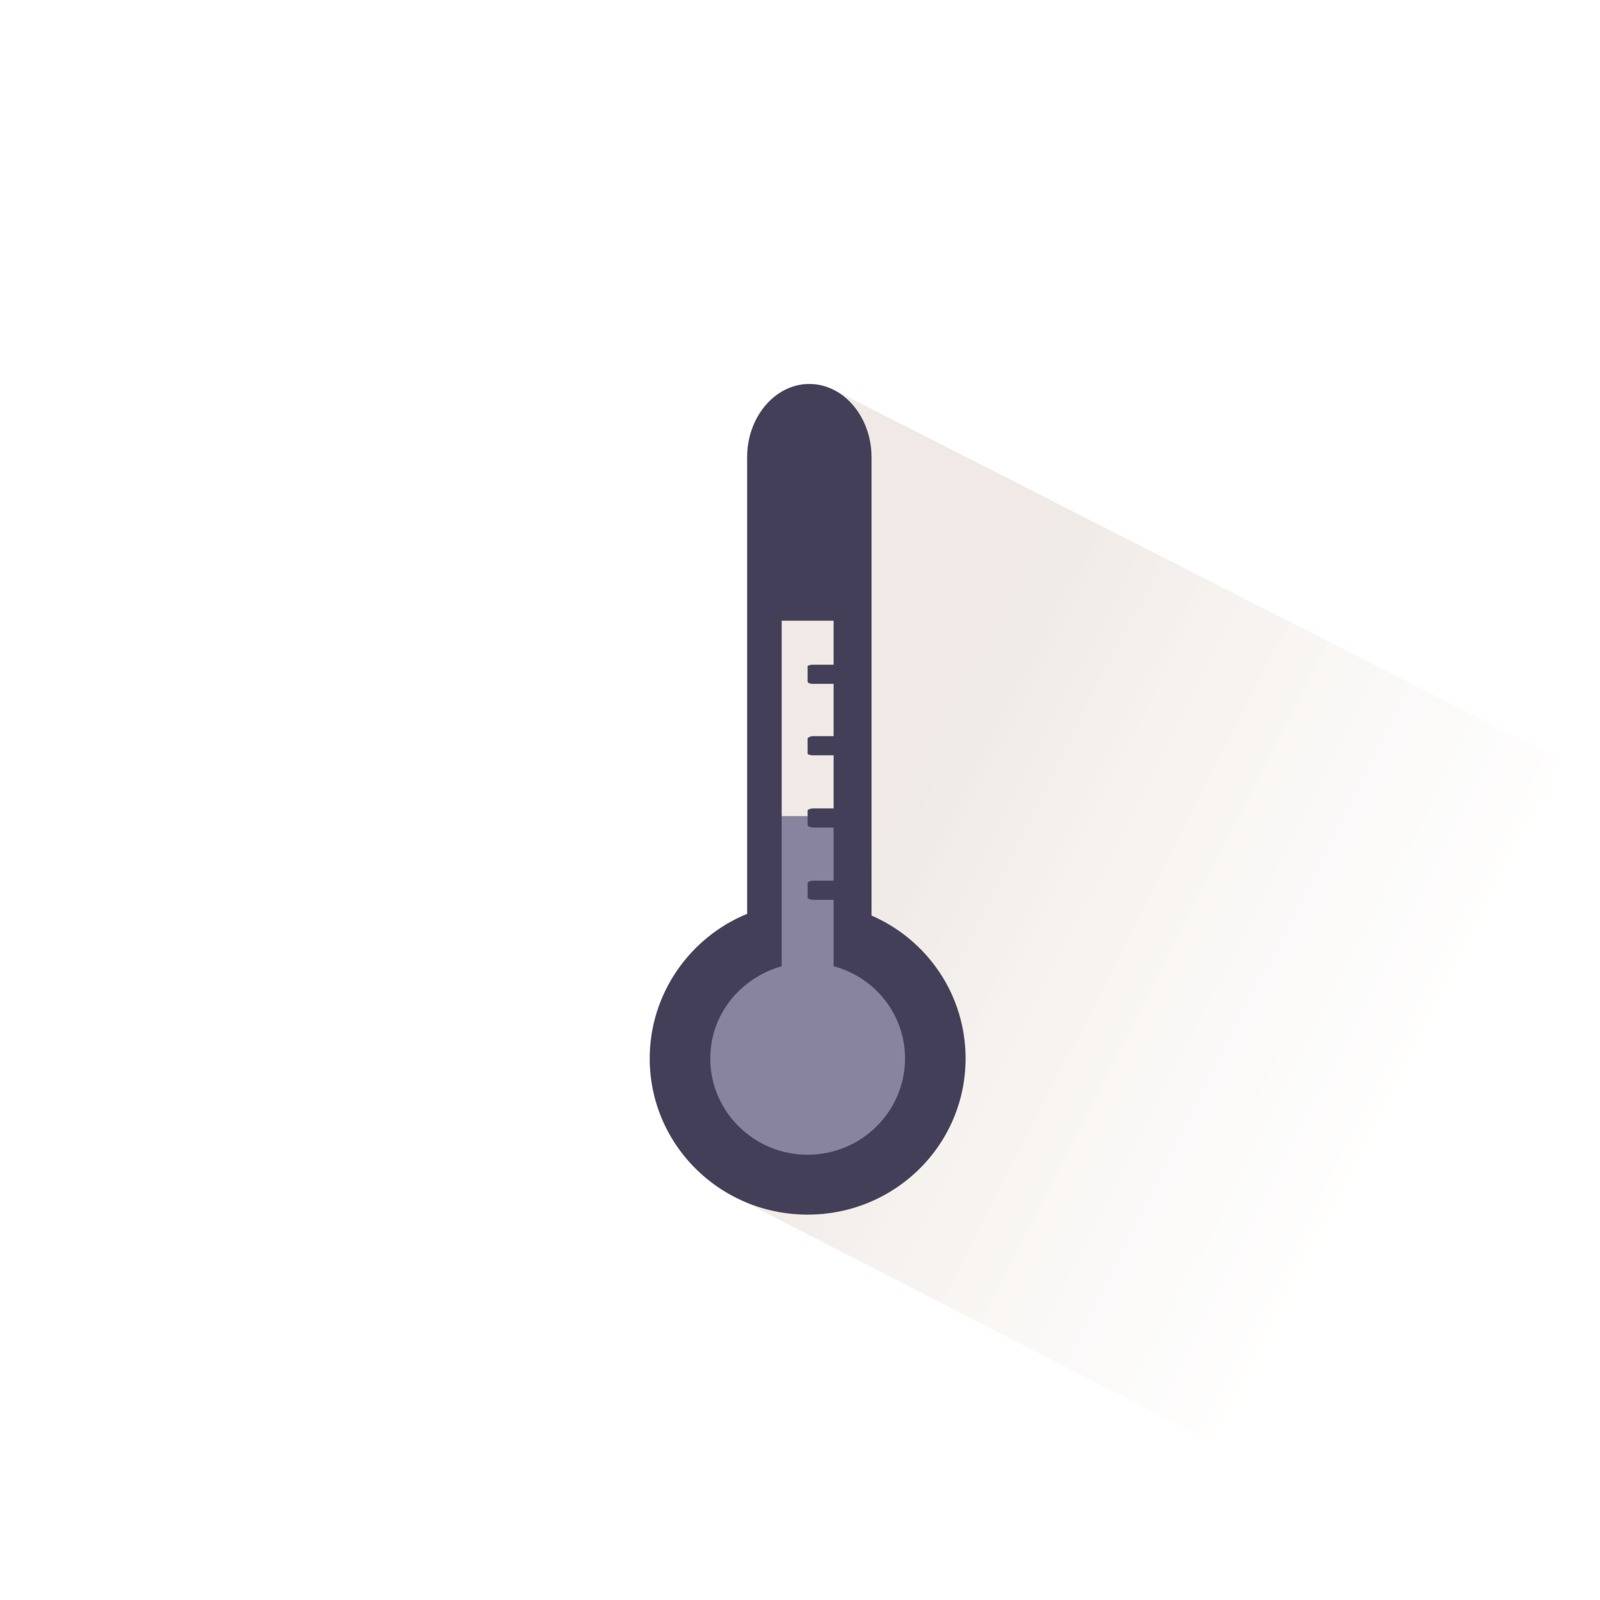 Weather thermometer color icon with shadow. Flat vector illustration